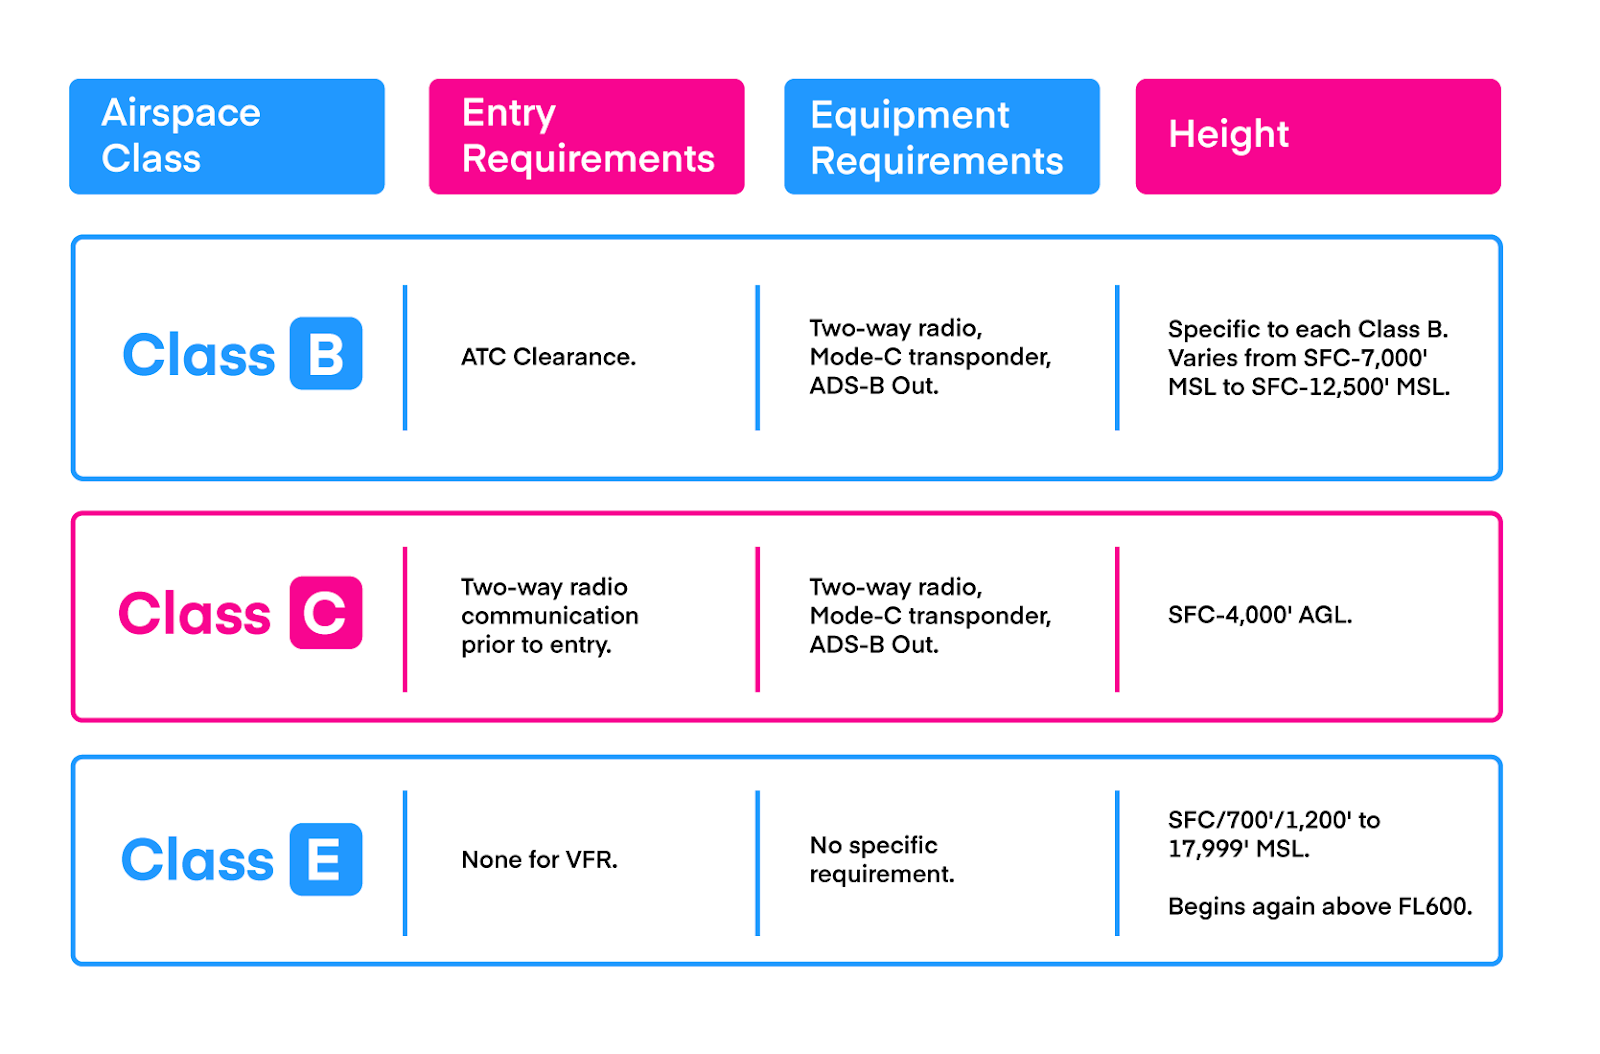 Chart showing requirements and height for Class B, C, and E airspace.